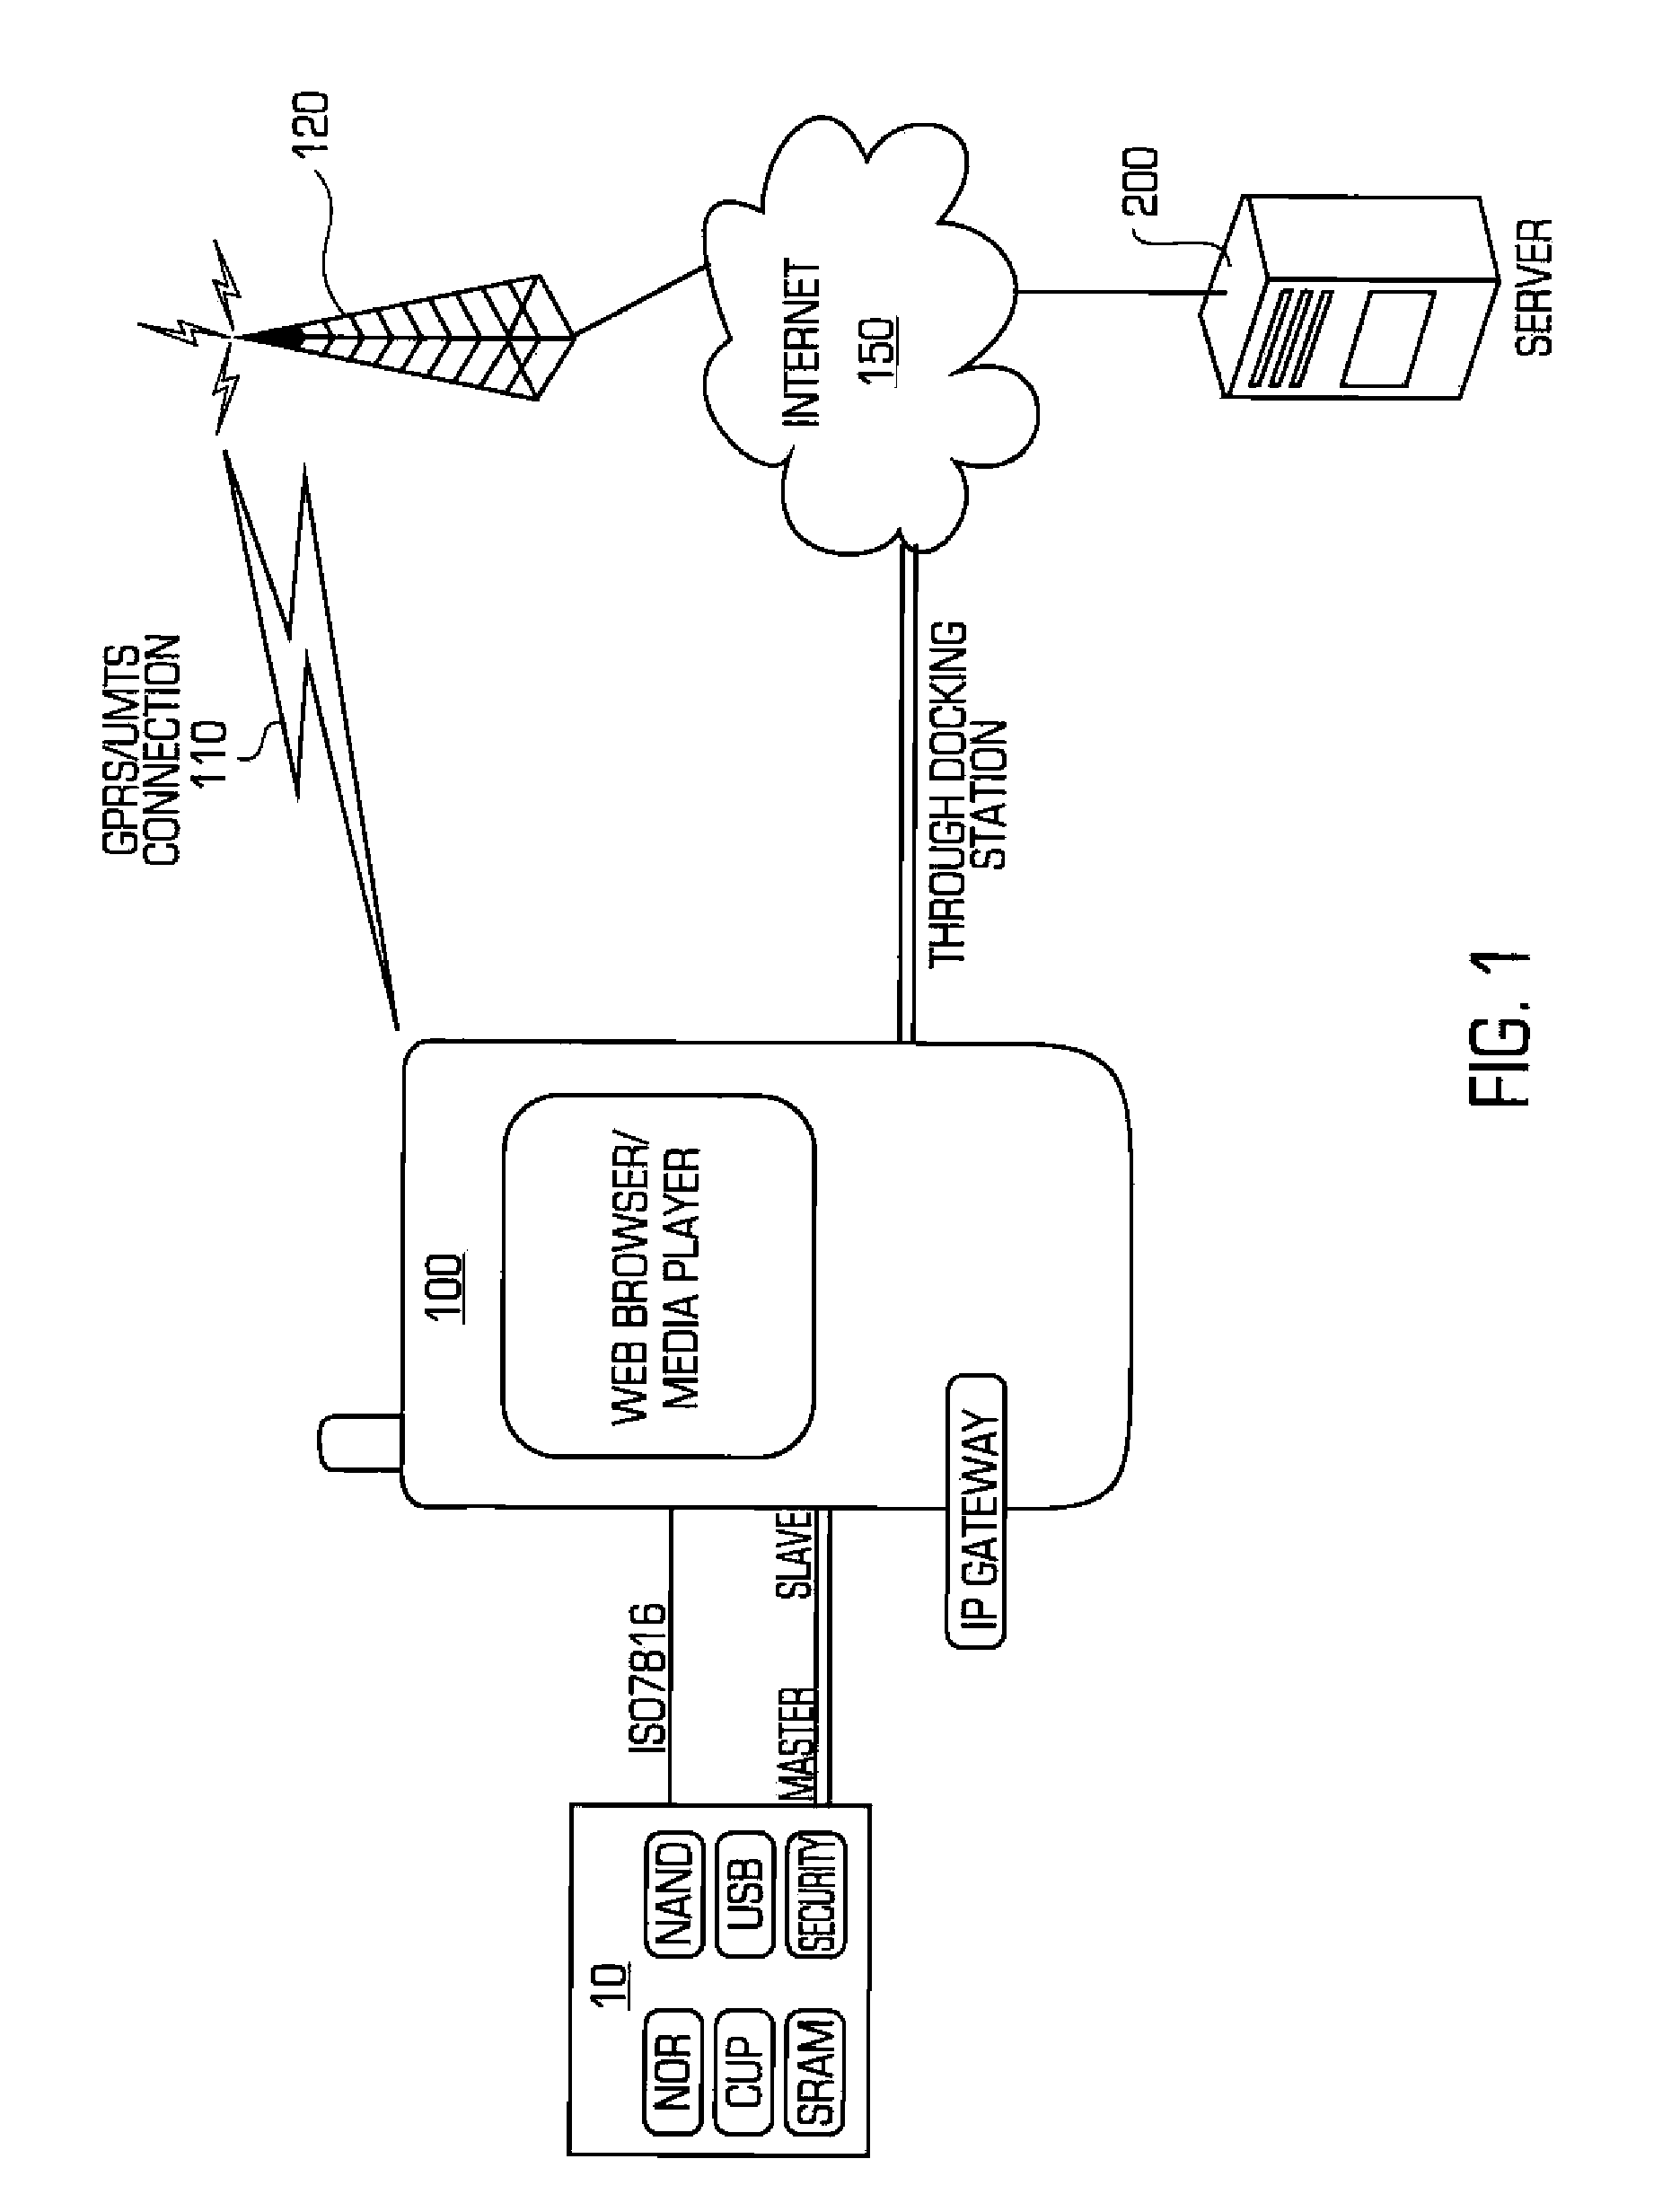 Secure removable card and a mobile wireless communication device